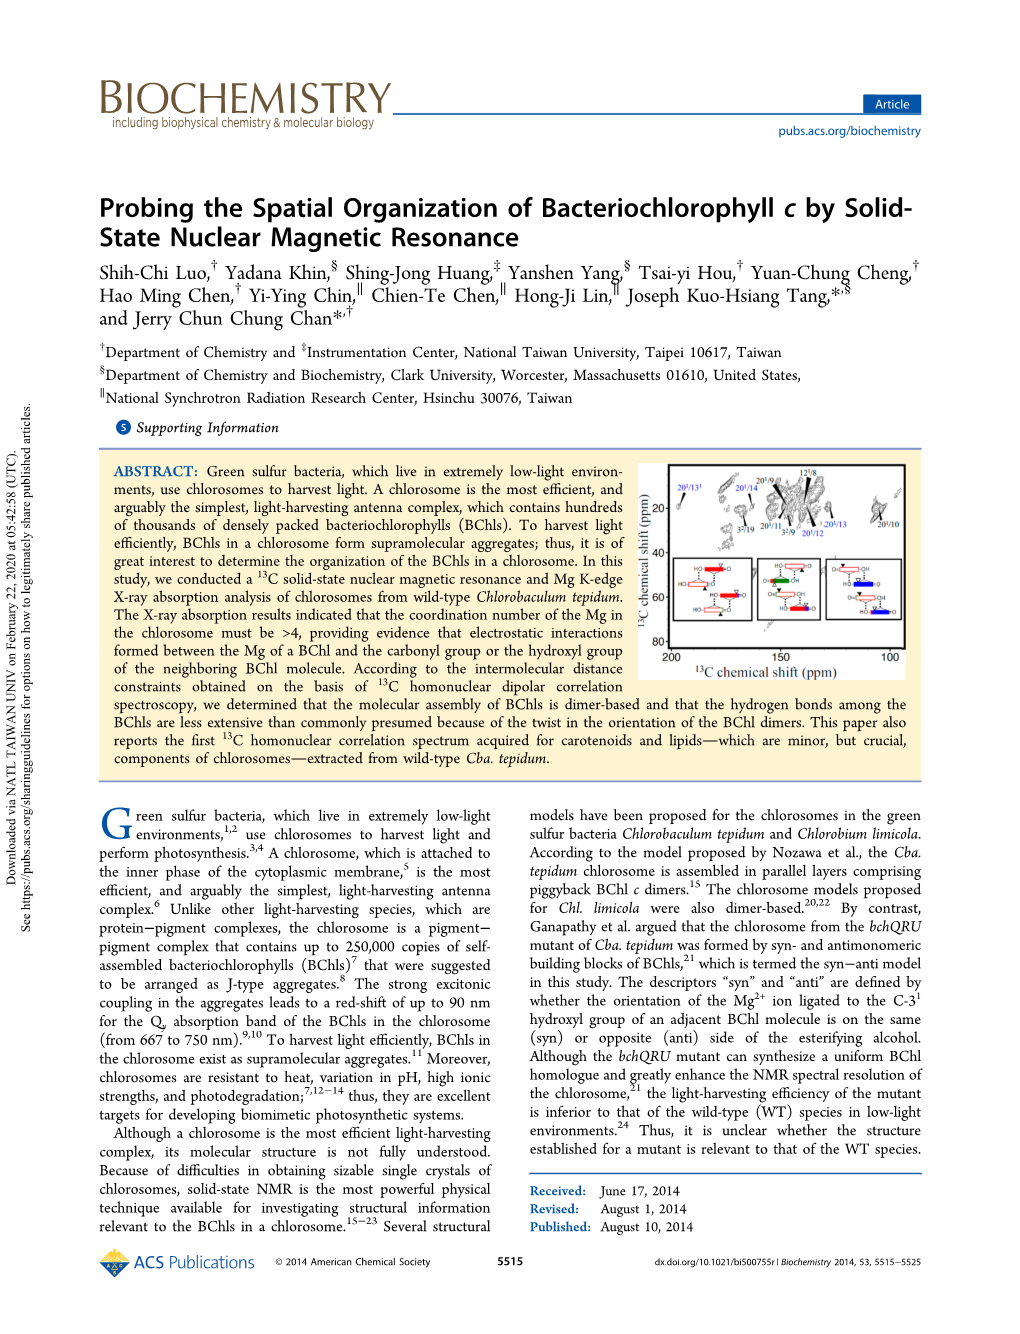 Probing the Spatial Organization of Bacteriochlorophyll C by Solid